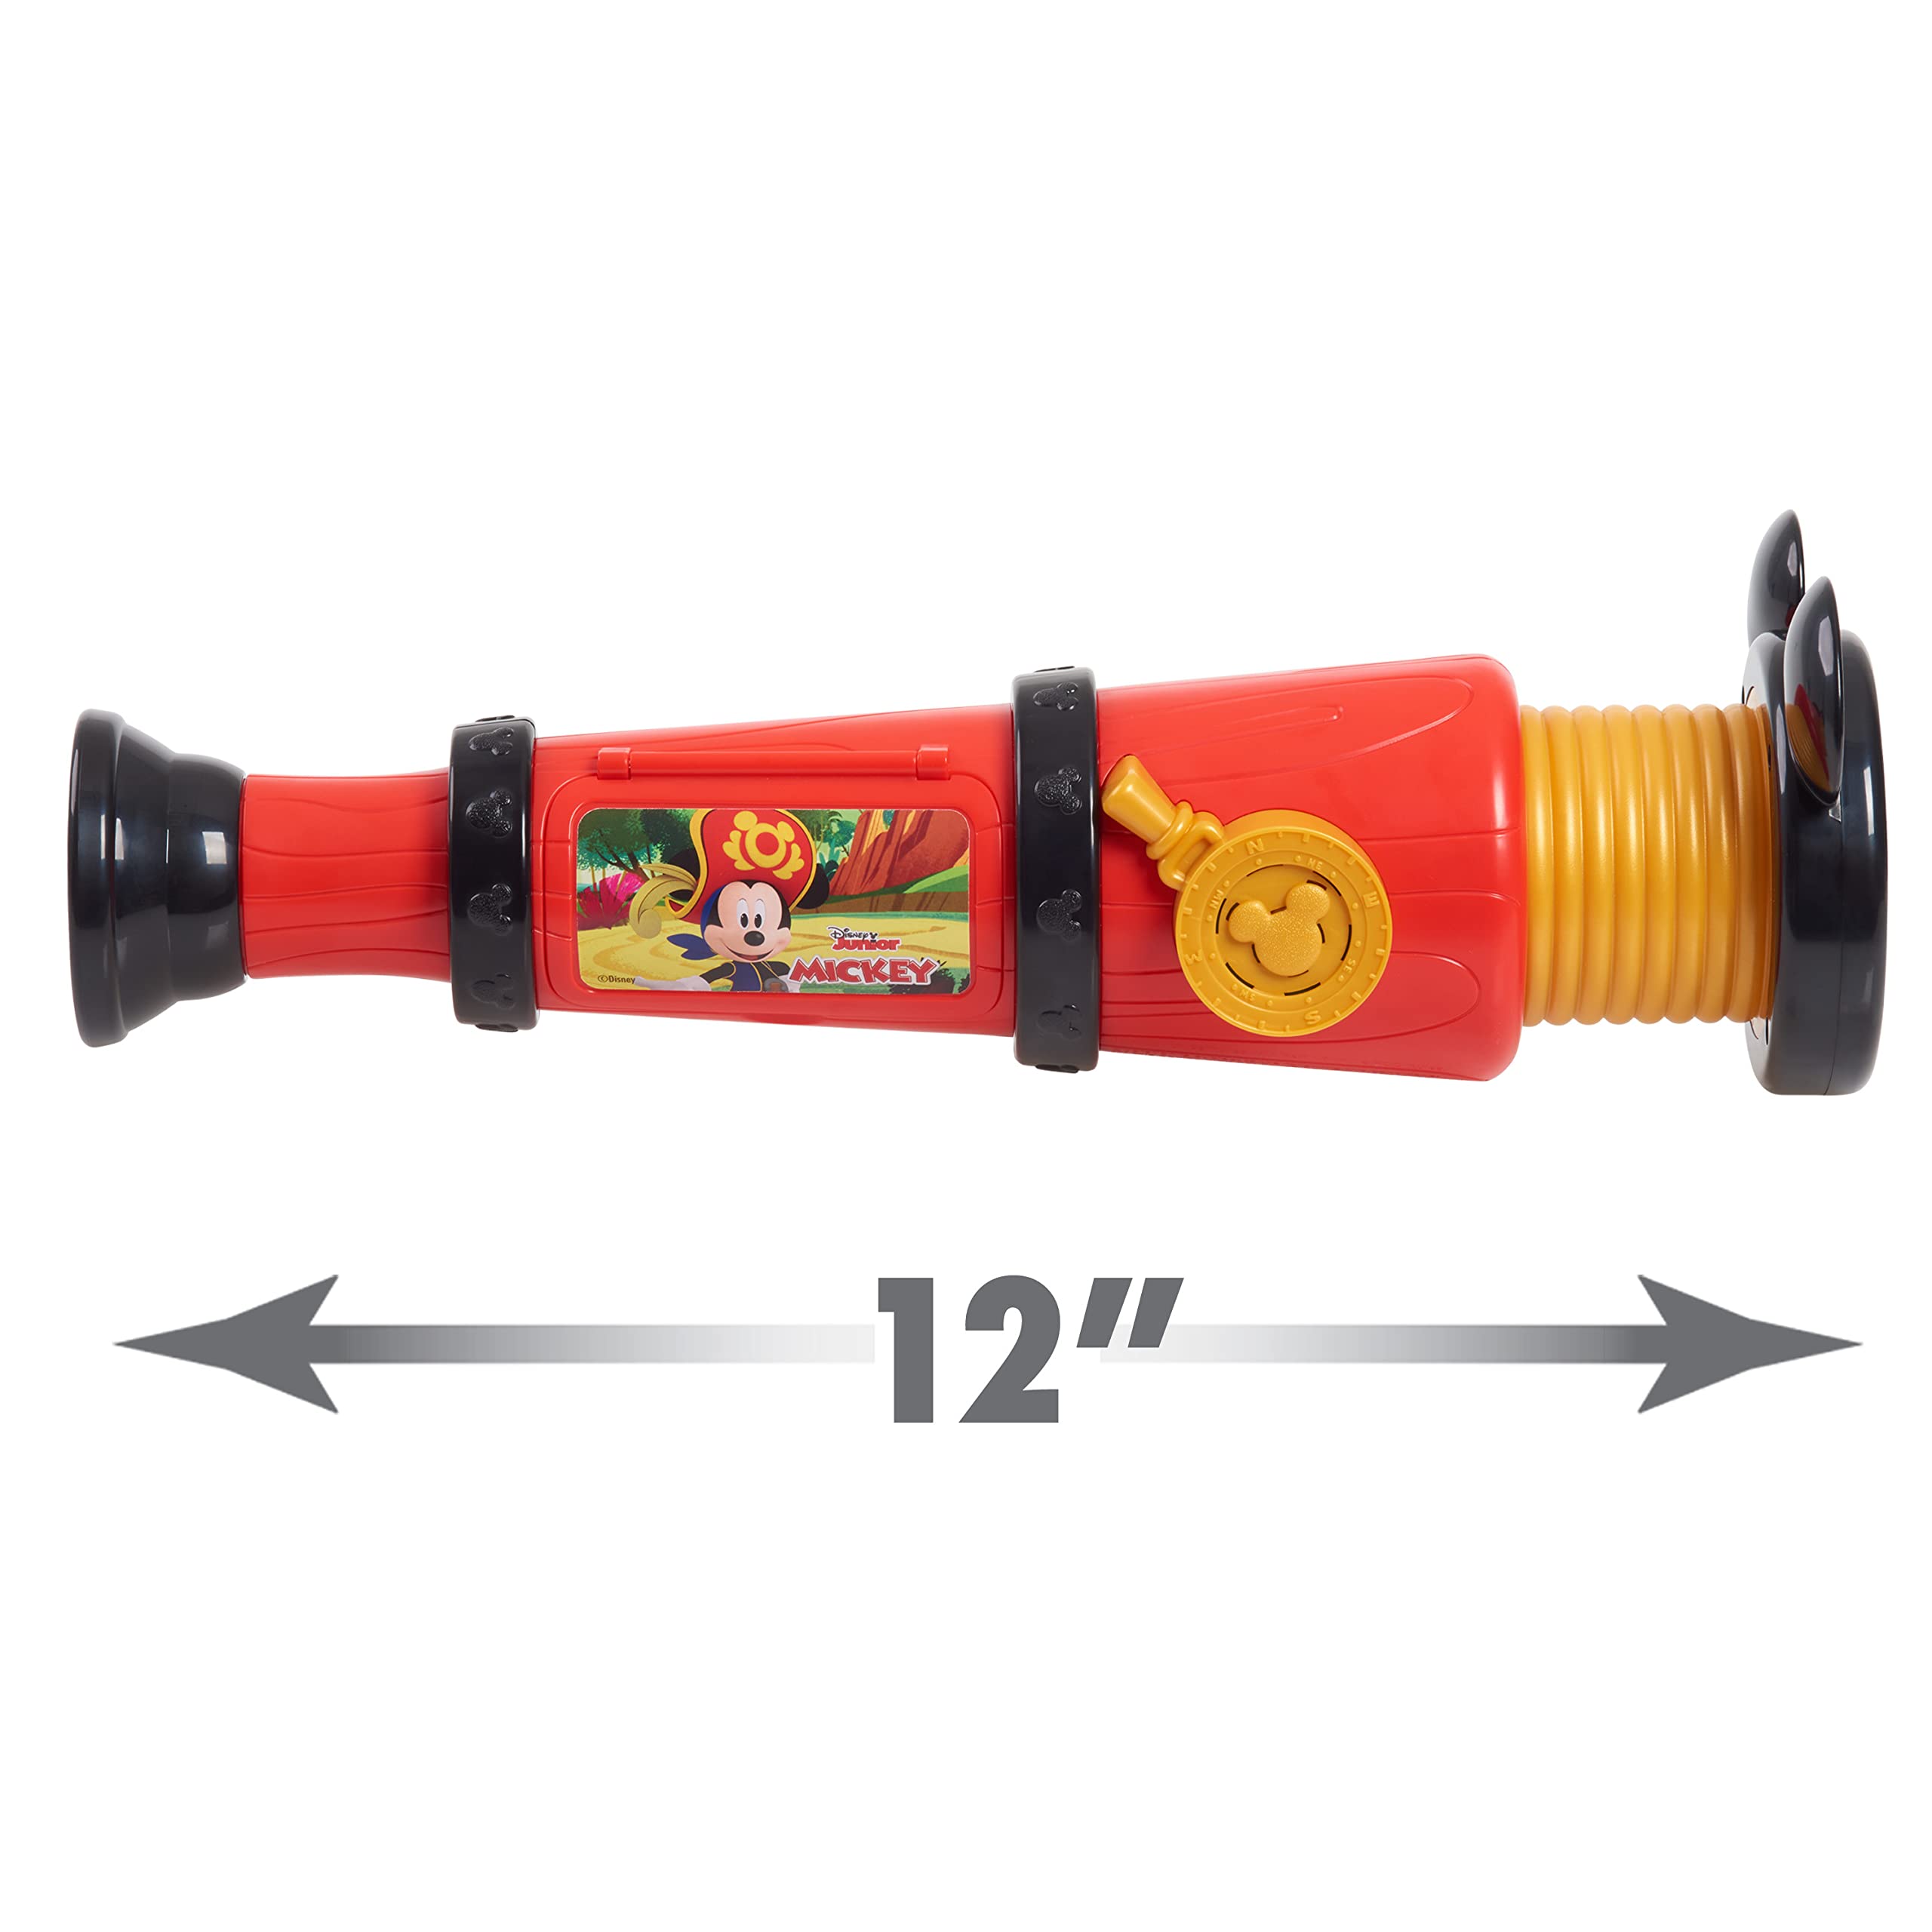 Disney Junior Mickey Mouse Adventure Spyglass With Sounds, Pirate Dress Up And Pretend Play, Officially Licensed Disney Kids Toys For Ages 3 Up